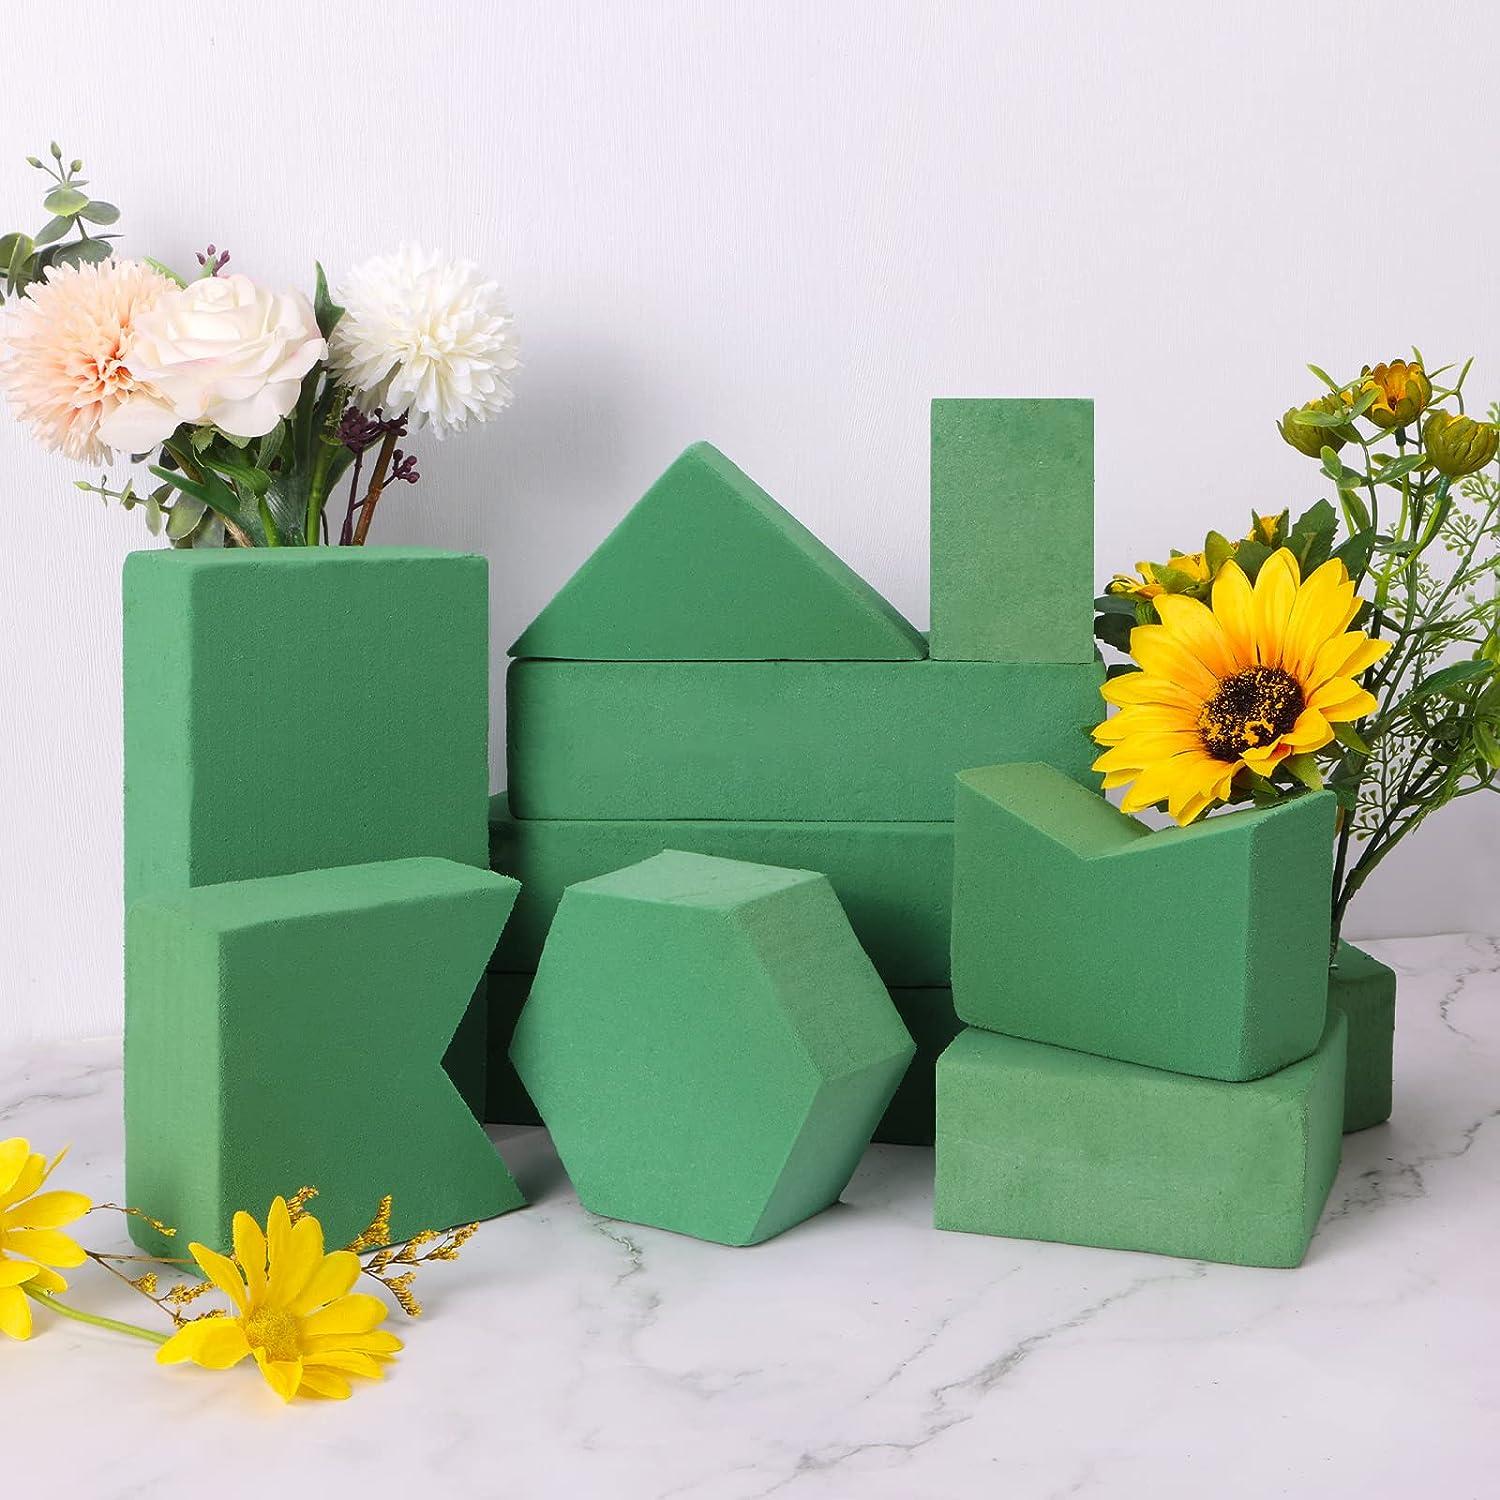 Whonline 8pcs Floral Foam Blocks, Wet and Dry Green Floral Bricks(7.5 L x 4  W x 2 H) for Home Arts & Crafts Projects, Flower Arrangement, DIY Baskets,  Wedding, Birthdays, and Garden Decorations